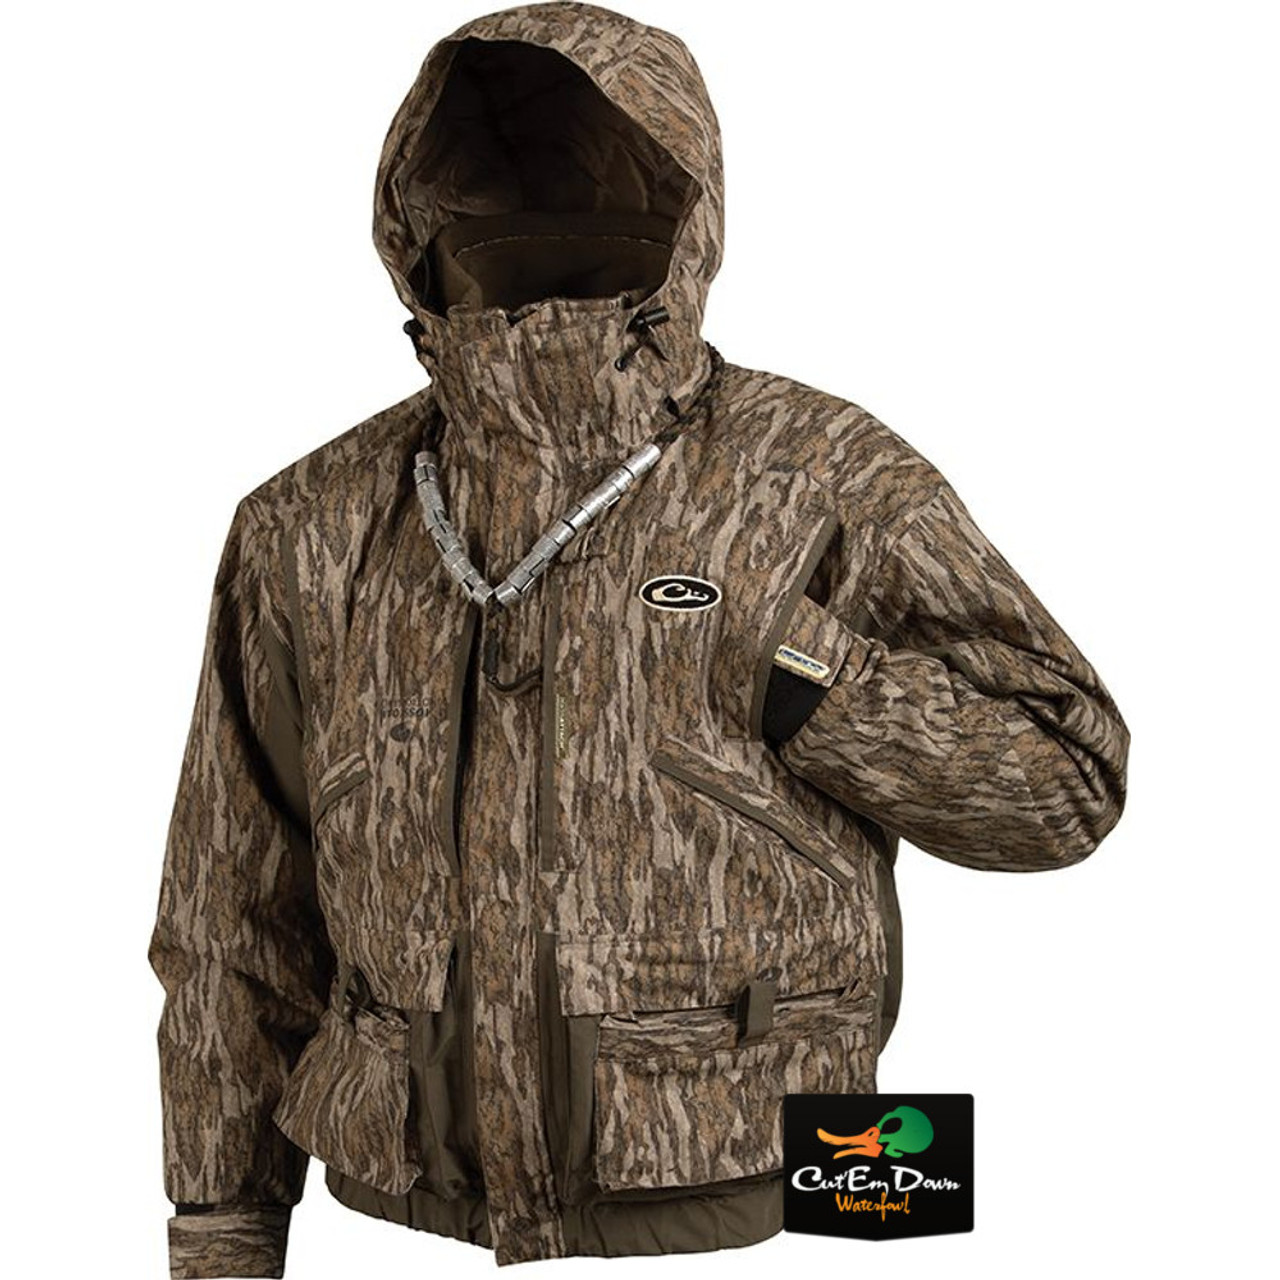 LST Waterfowler’s Insulated Coat 2.0 DW1041